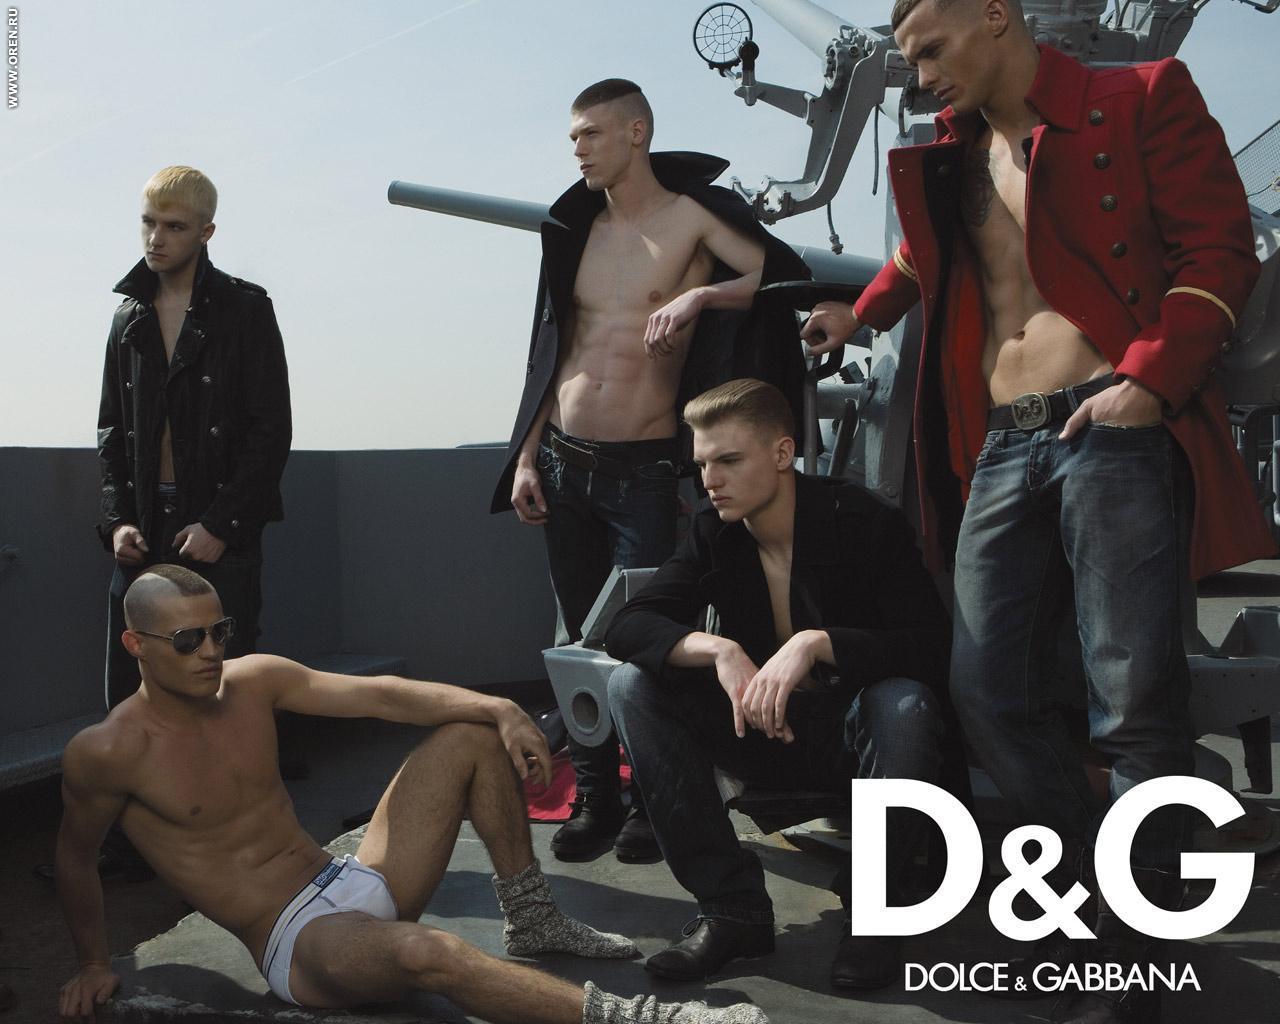 The Dolce and Gabbana